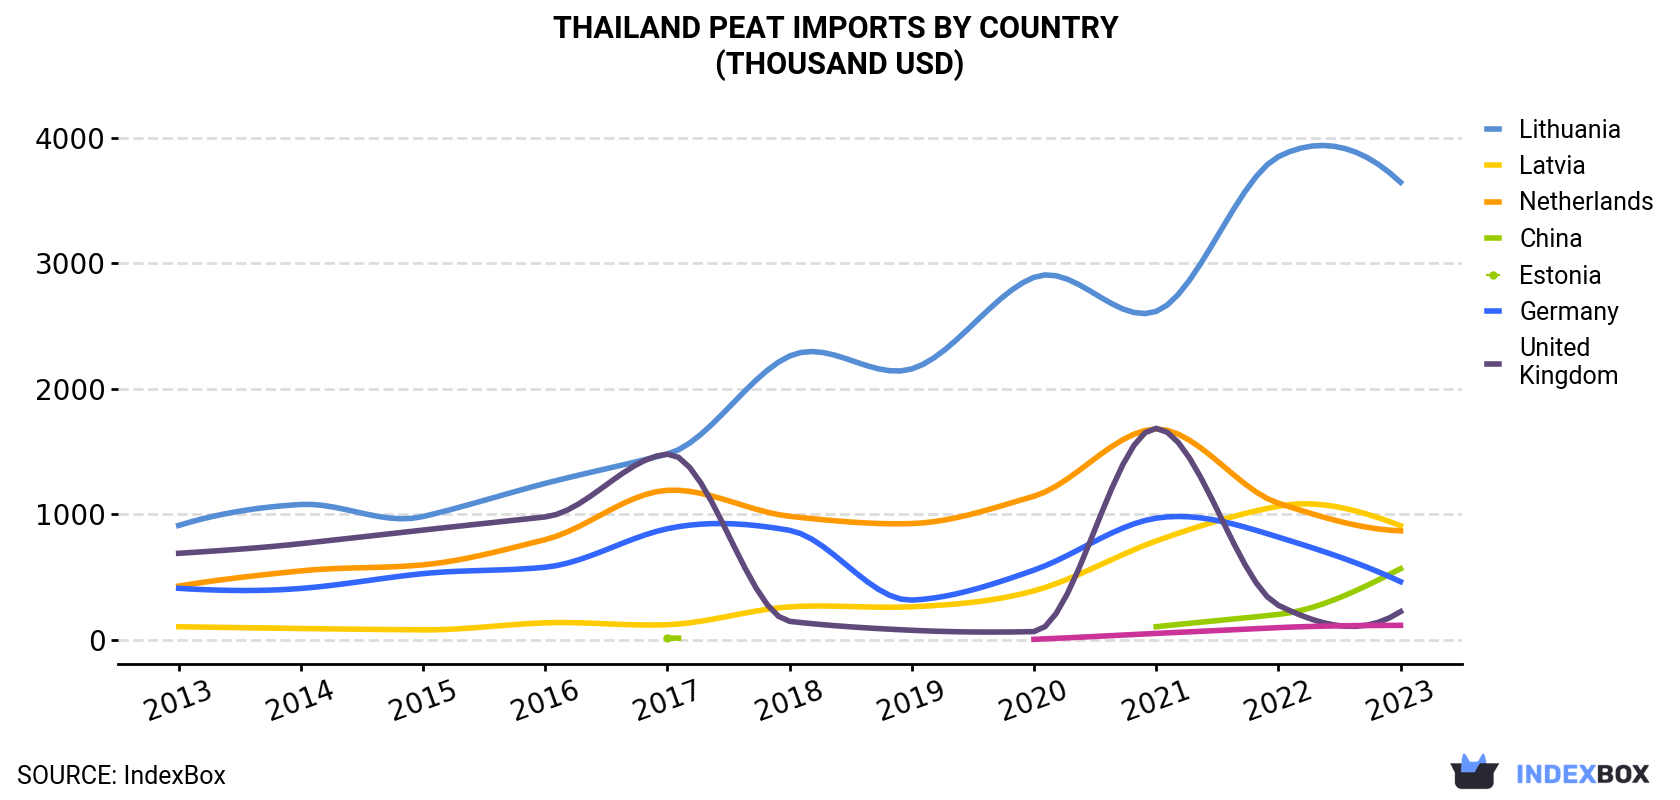 Thailand Peat Imports By Country (Thousand USD)